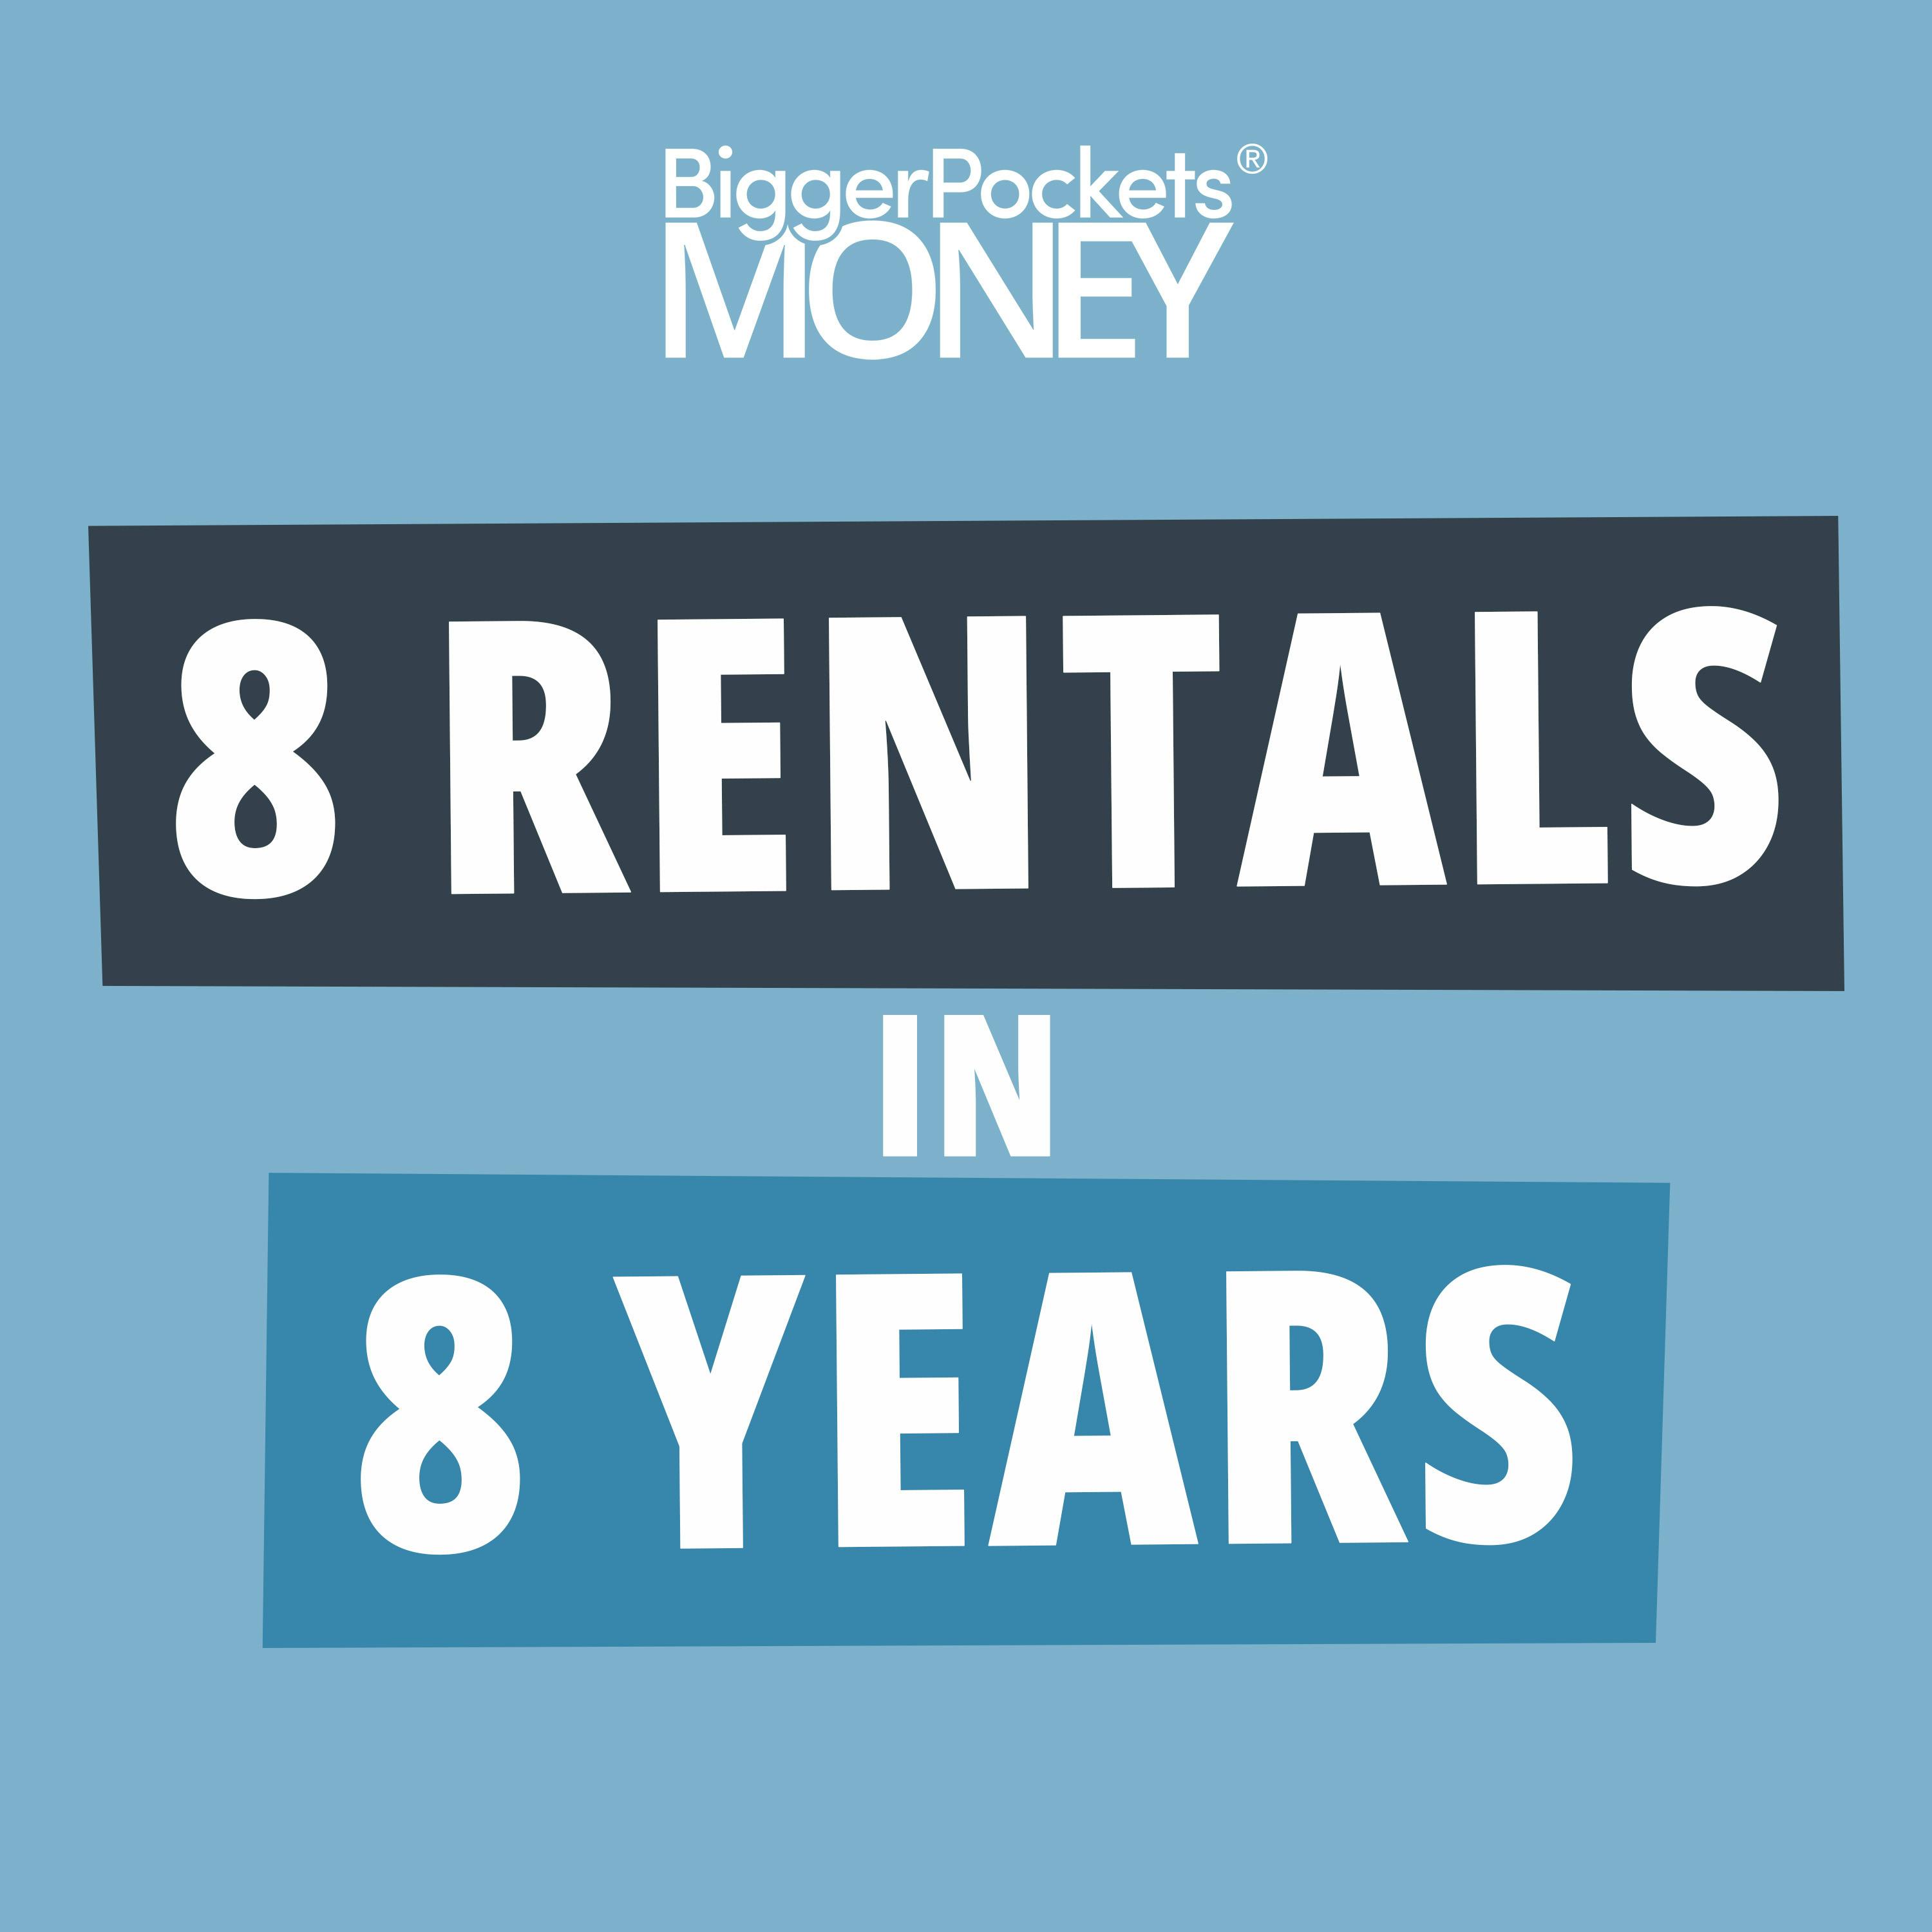 407: 8 Rentals in 8 Years and Unlocking MASSIVE Tax Breaks with One Career Move